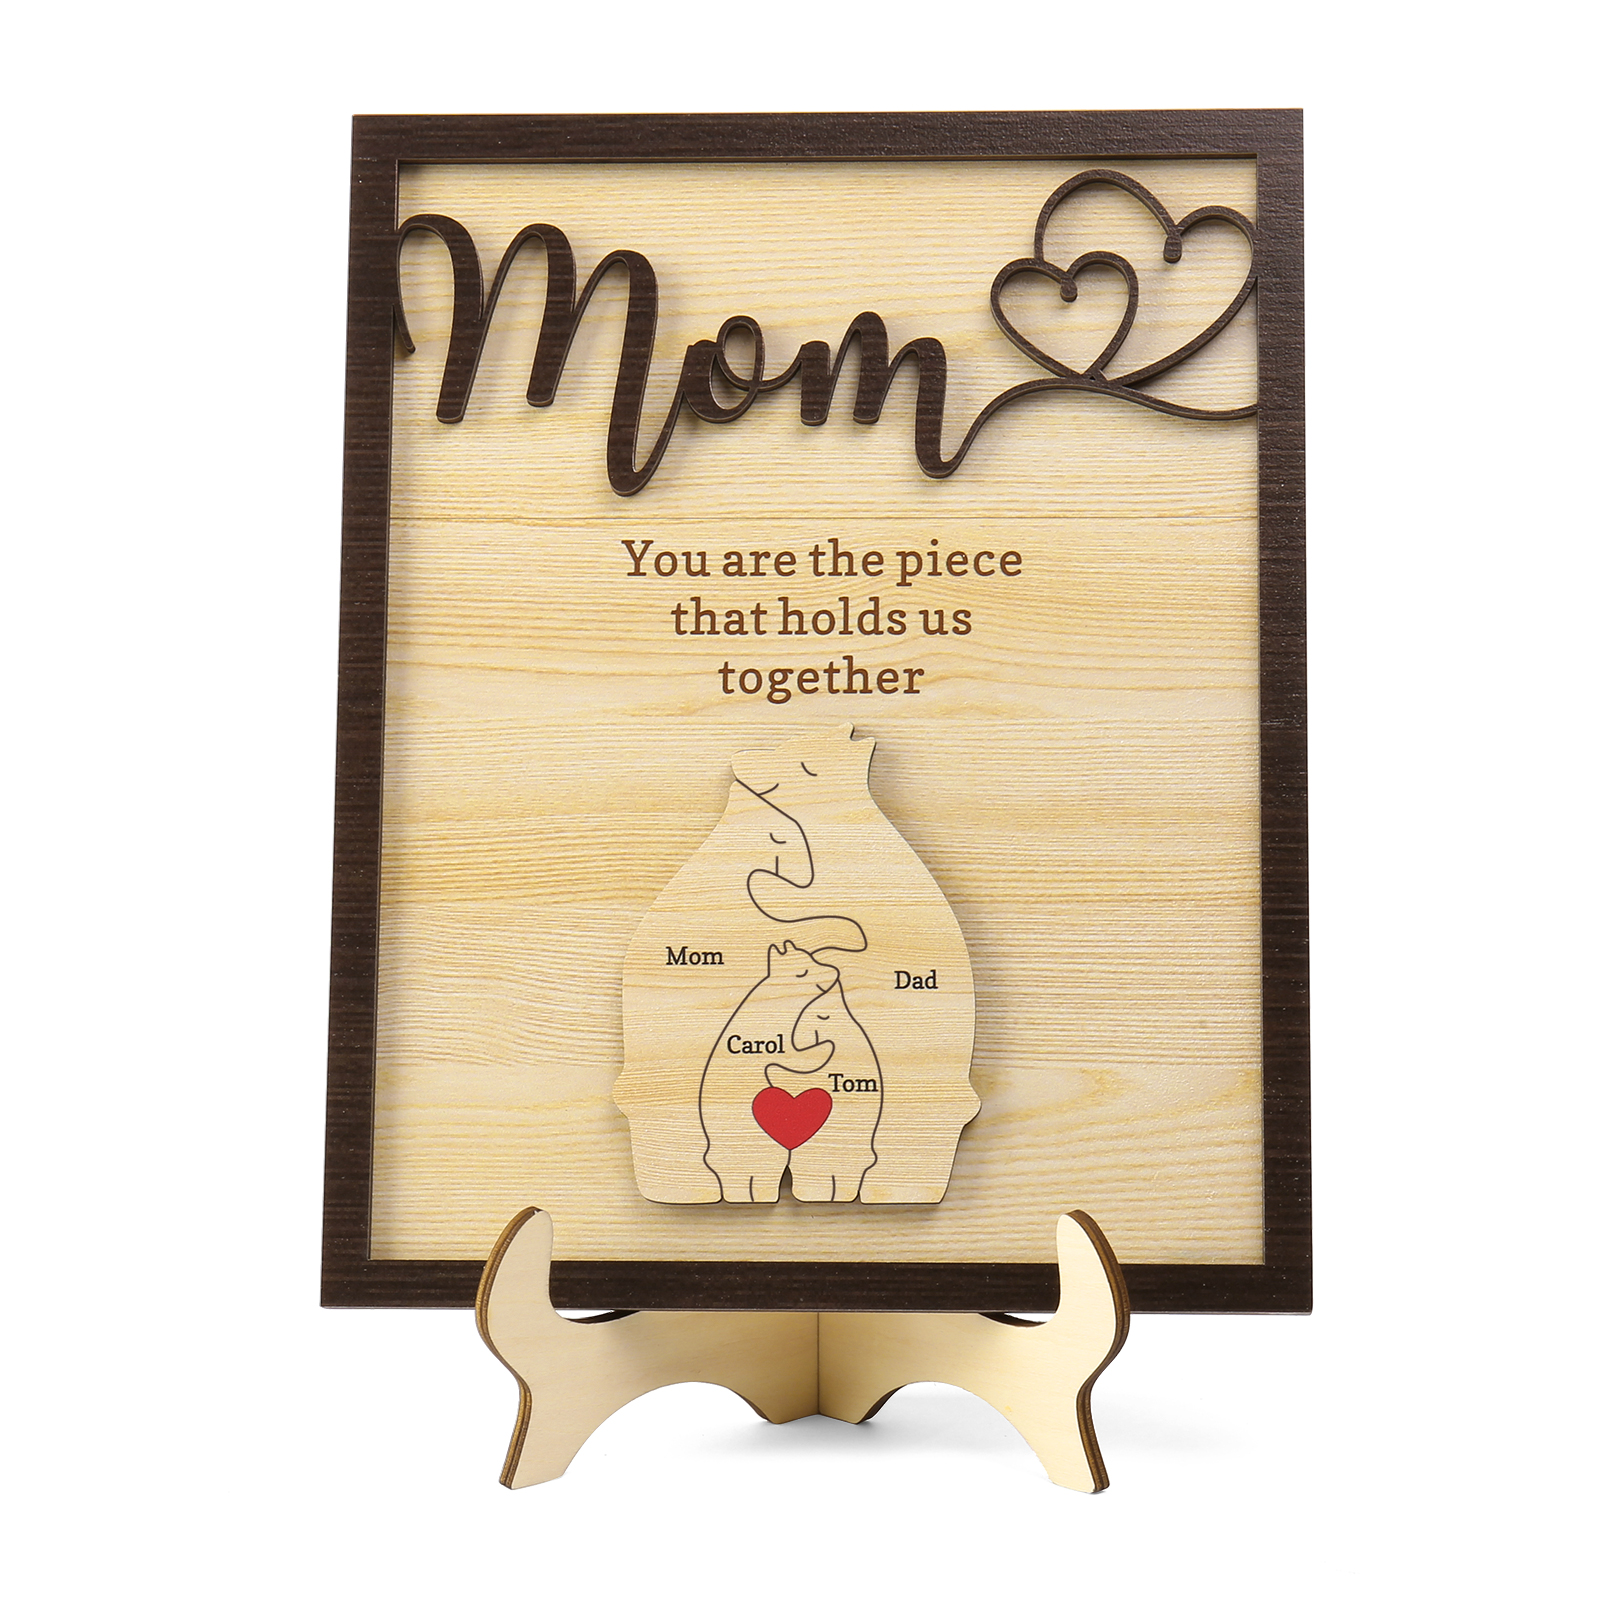 3 Names - Personalized Home Frame Wooden Ornaments Cute Bear Style Cus